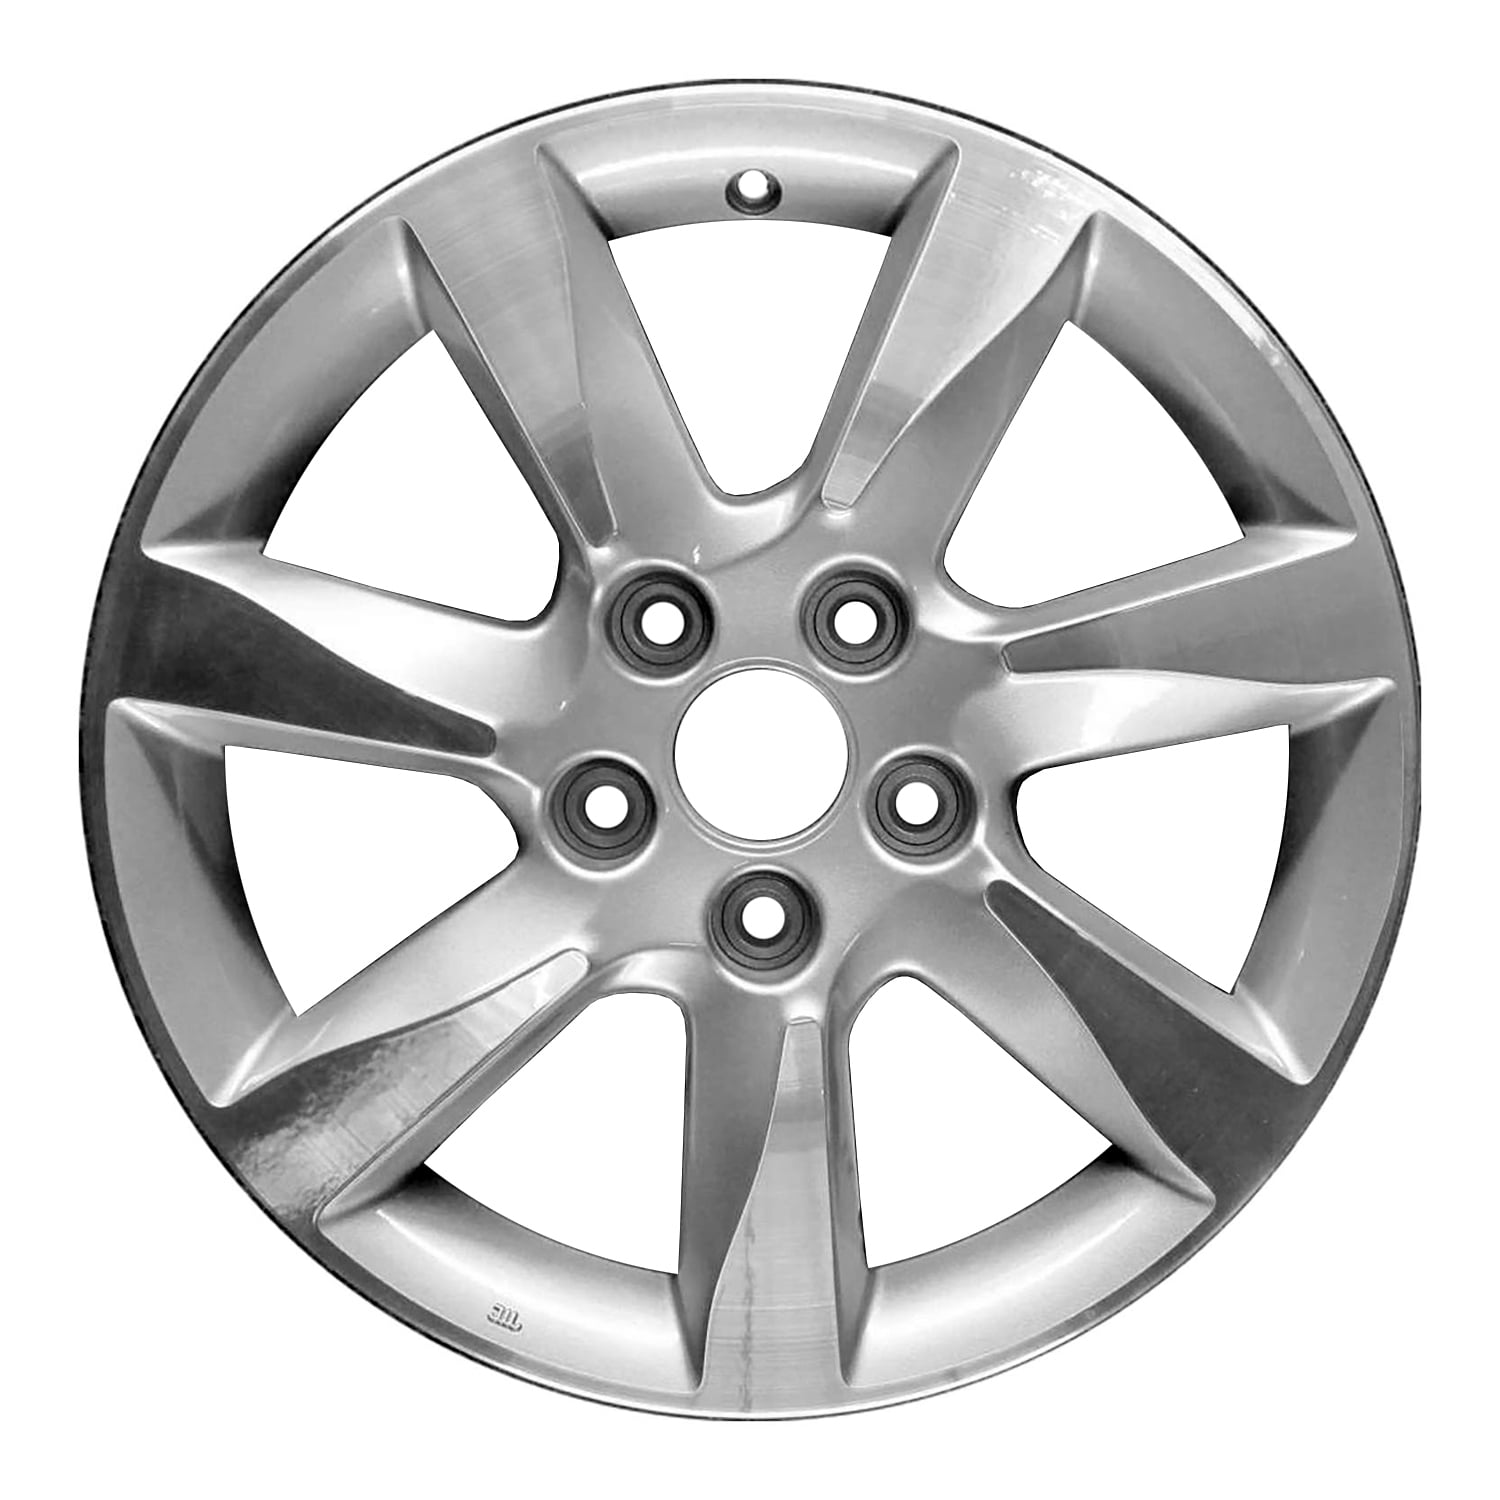 Replacement 5 Spokes Sparkle Silver Factory Alloy Wheel Fits Dodge Ram 1500